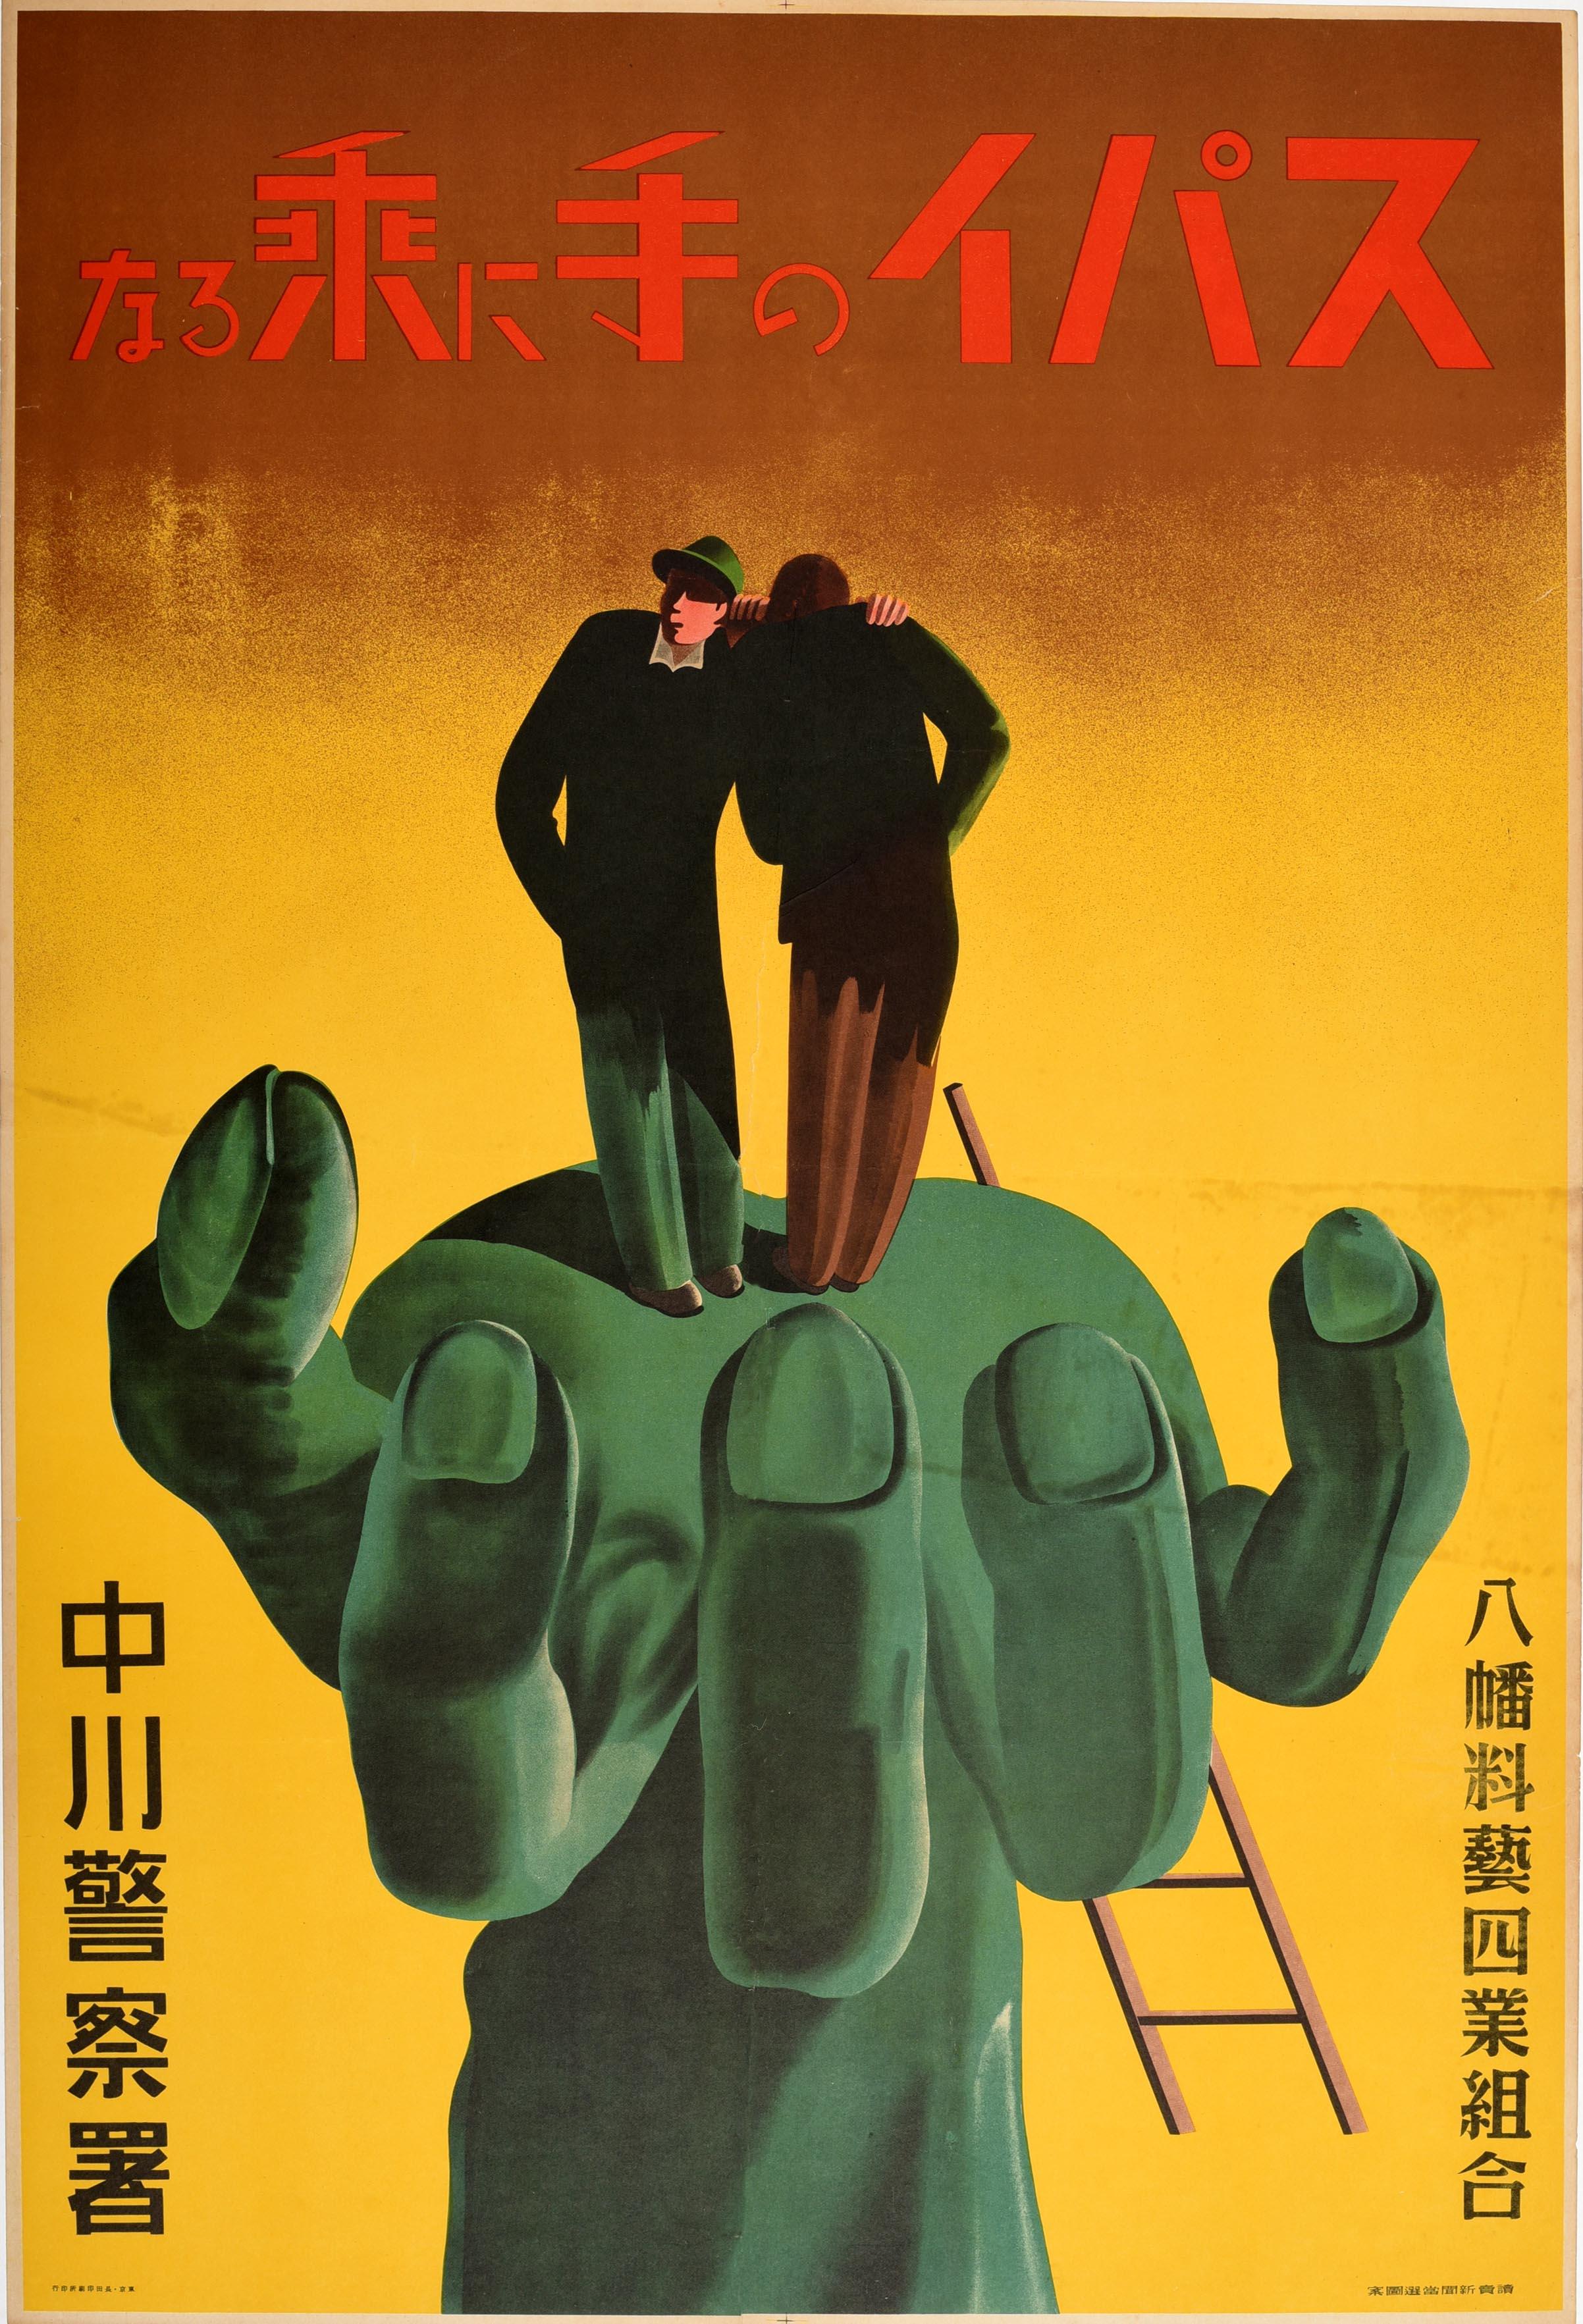 Unknown Print - Original Vintage Poster Don't Get In The Hands Of Spies WWII Japanese Propaganda